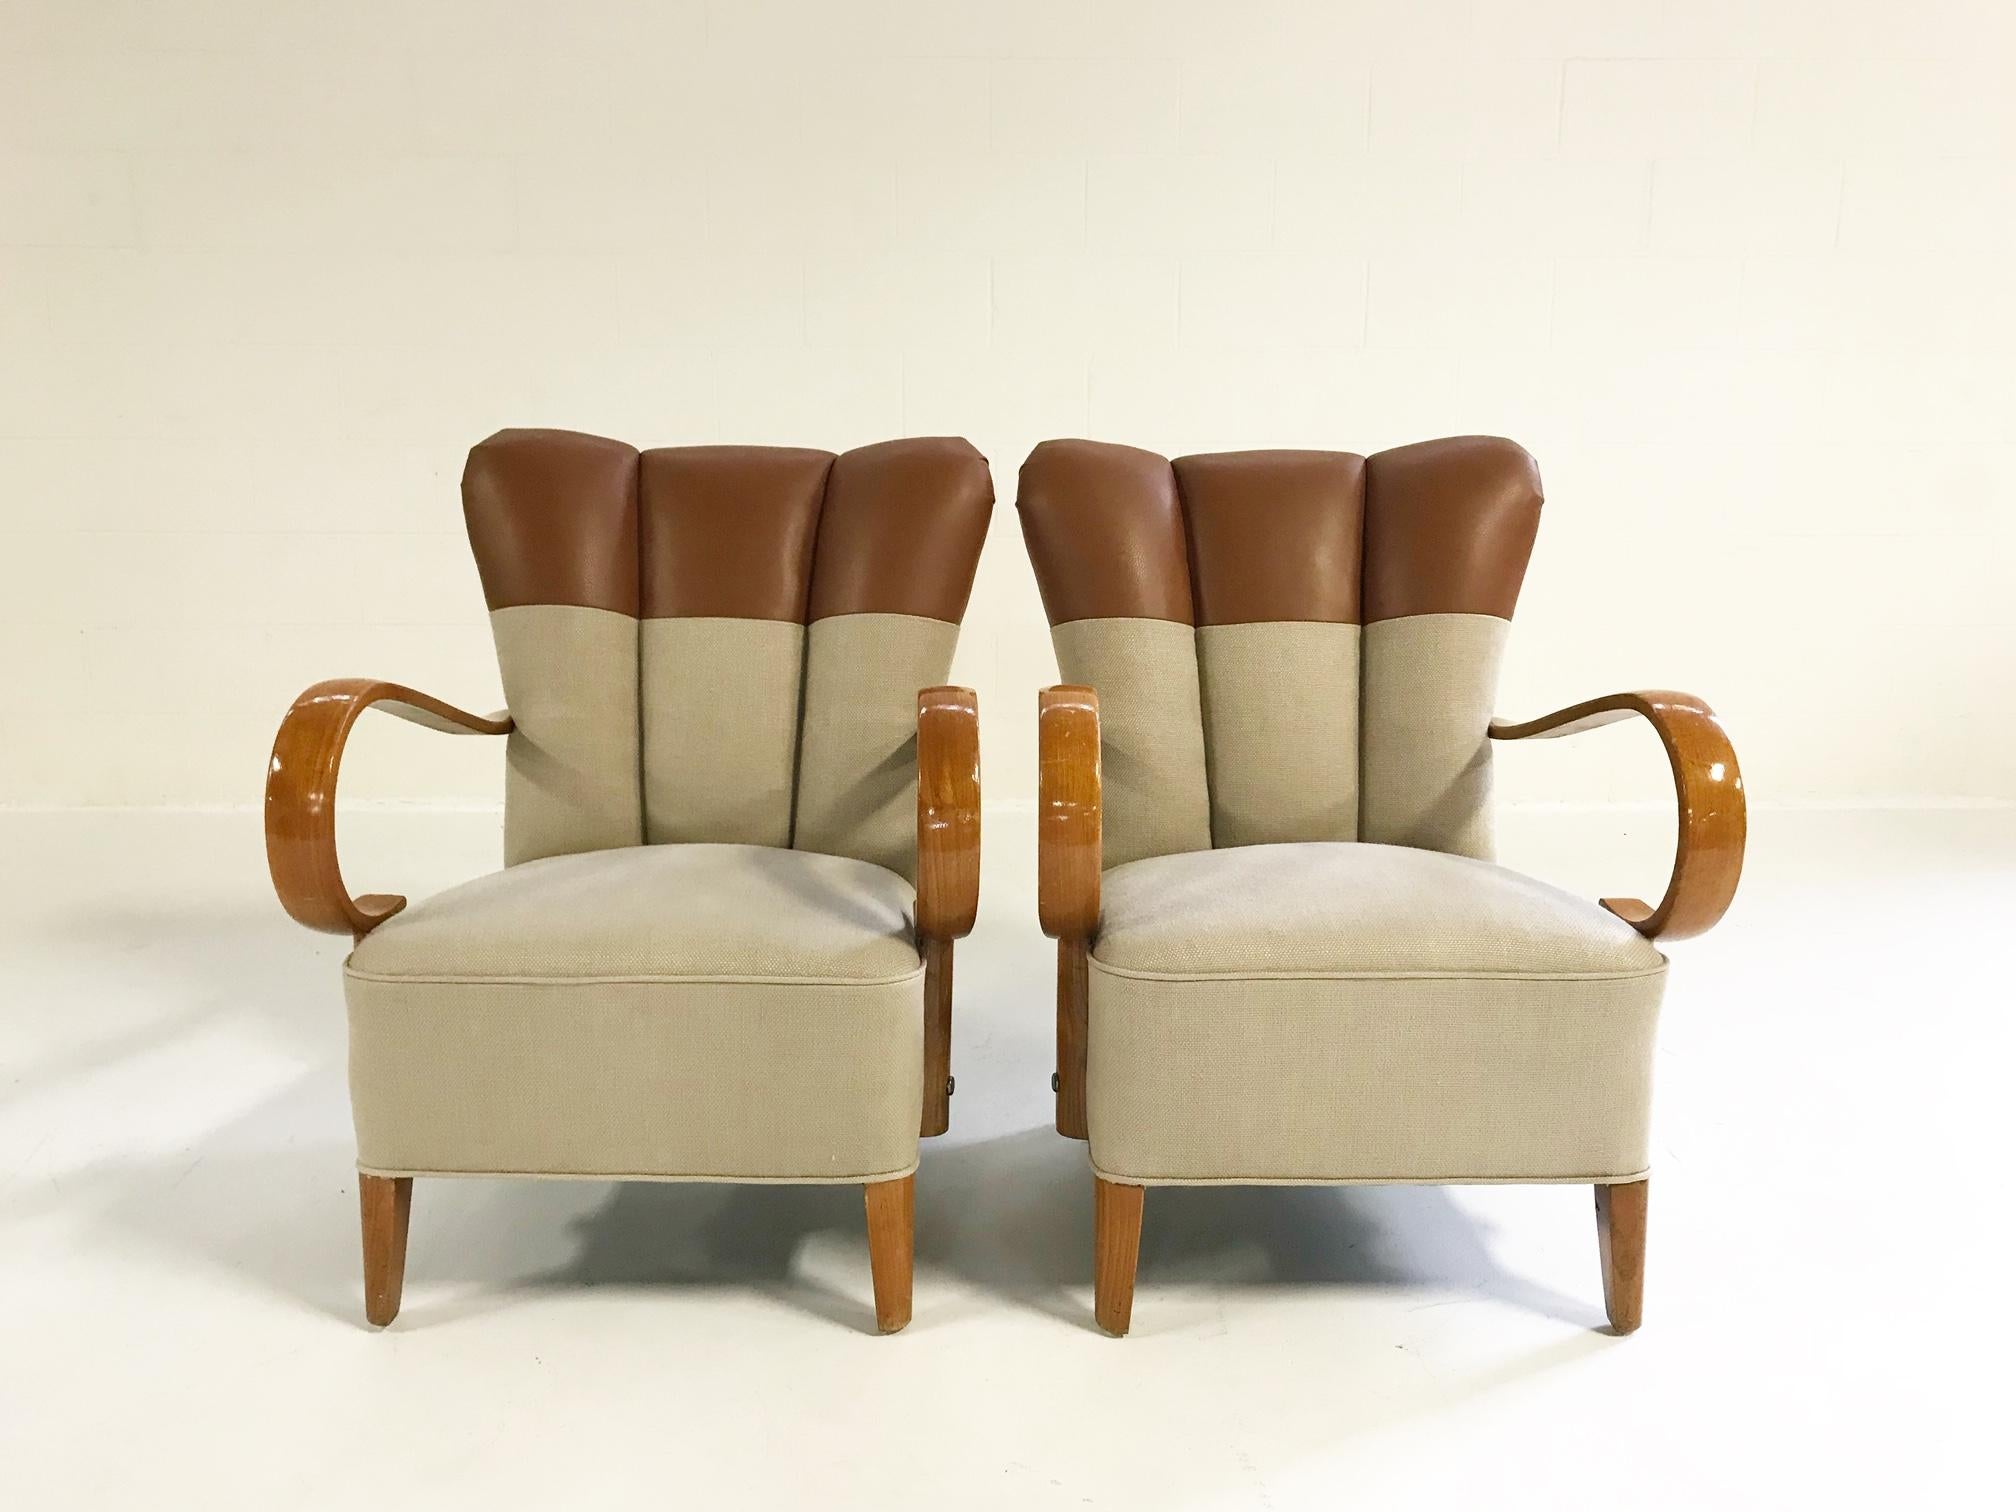 Modern 1970s, Italian Bentwood Armchairs Restored in Loro Piana Leather and Linen